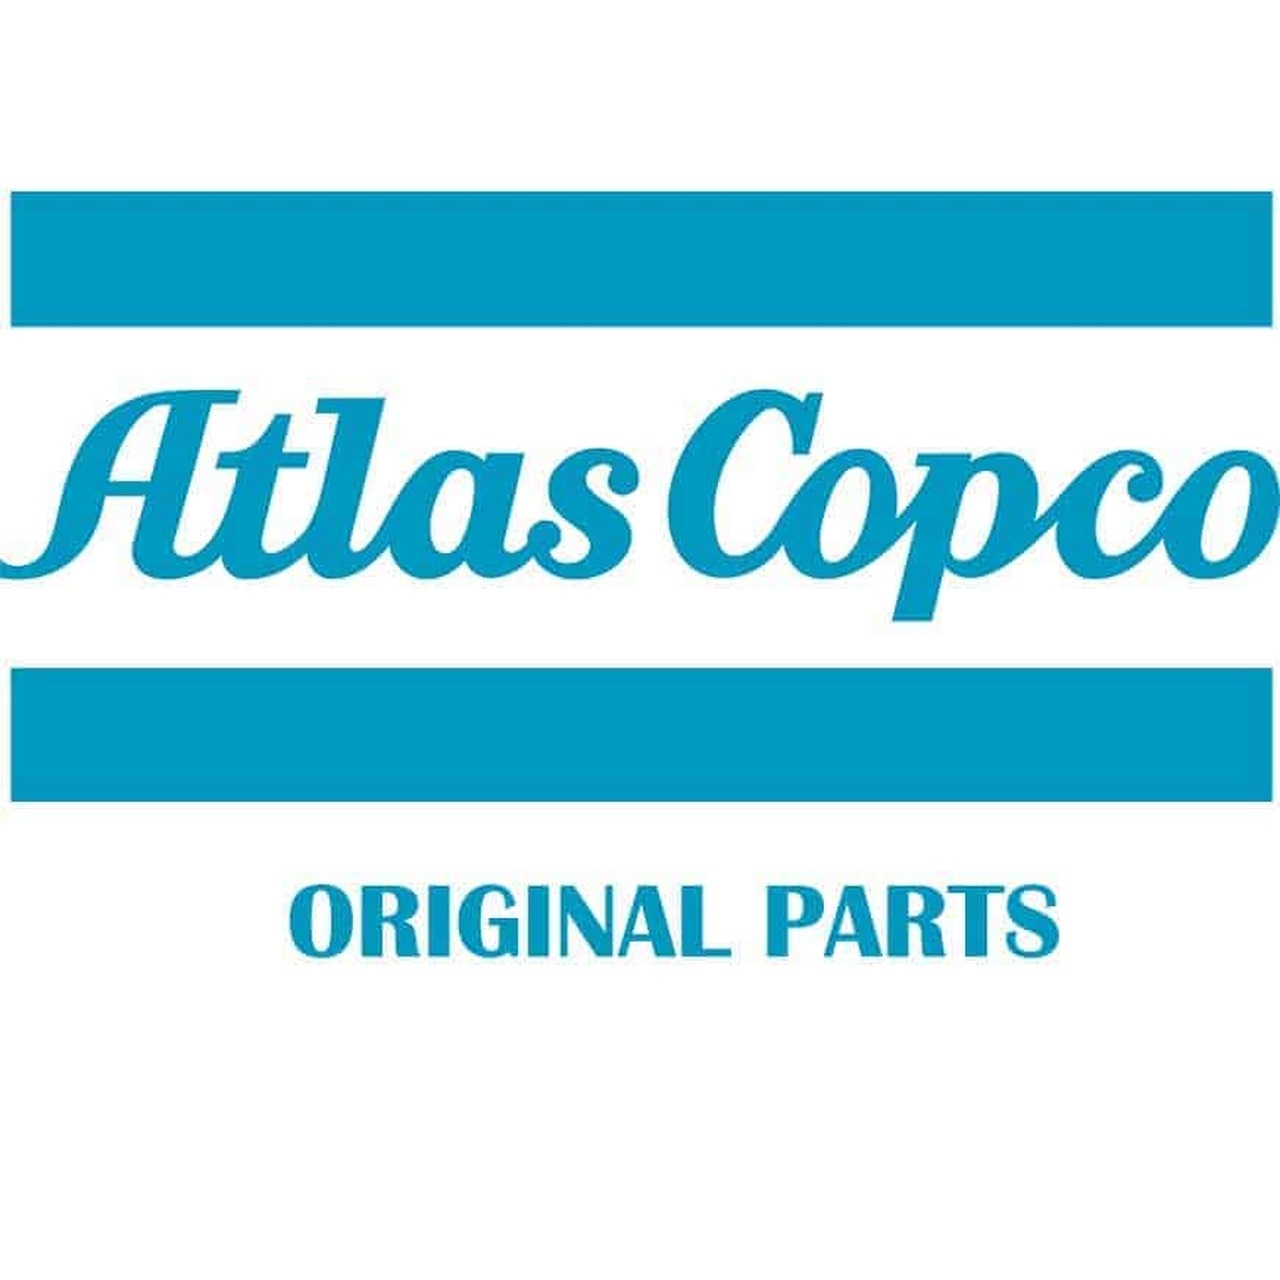 6221-3728-50 Separator Designed for use with Atlas Copco Compressors 